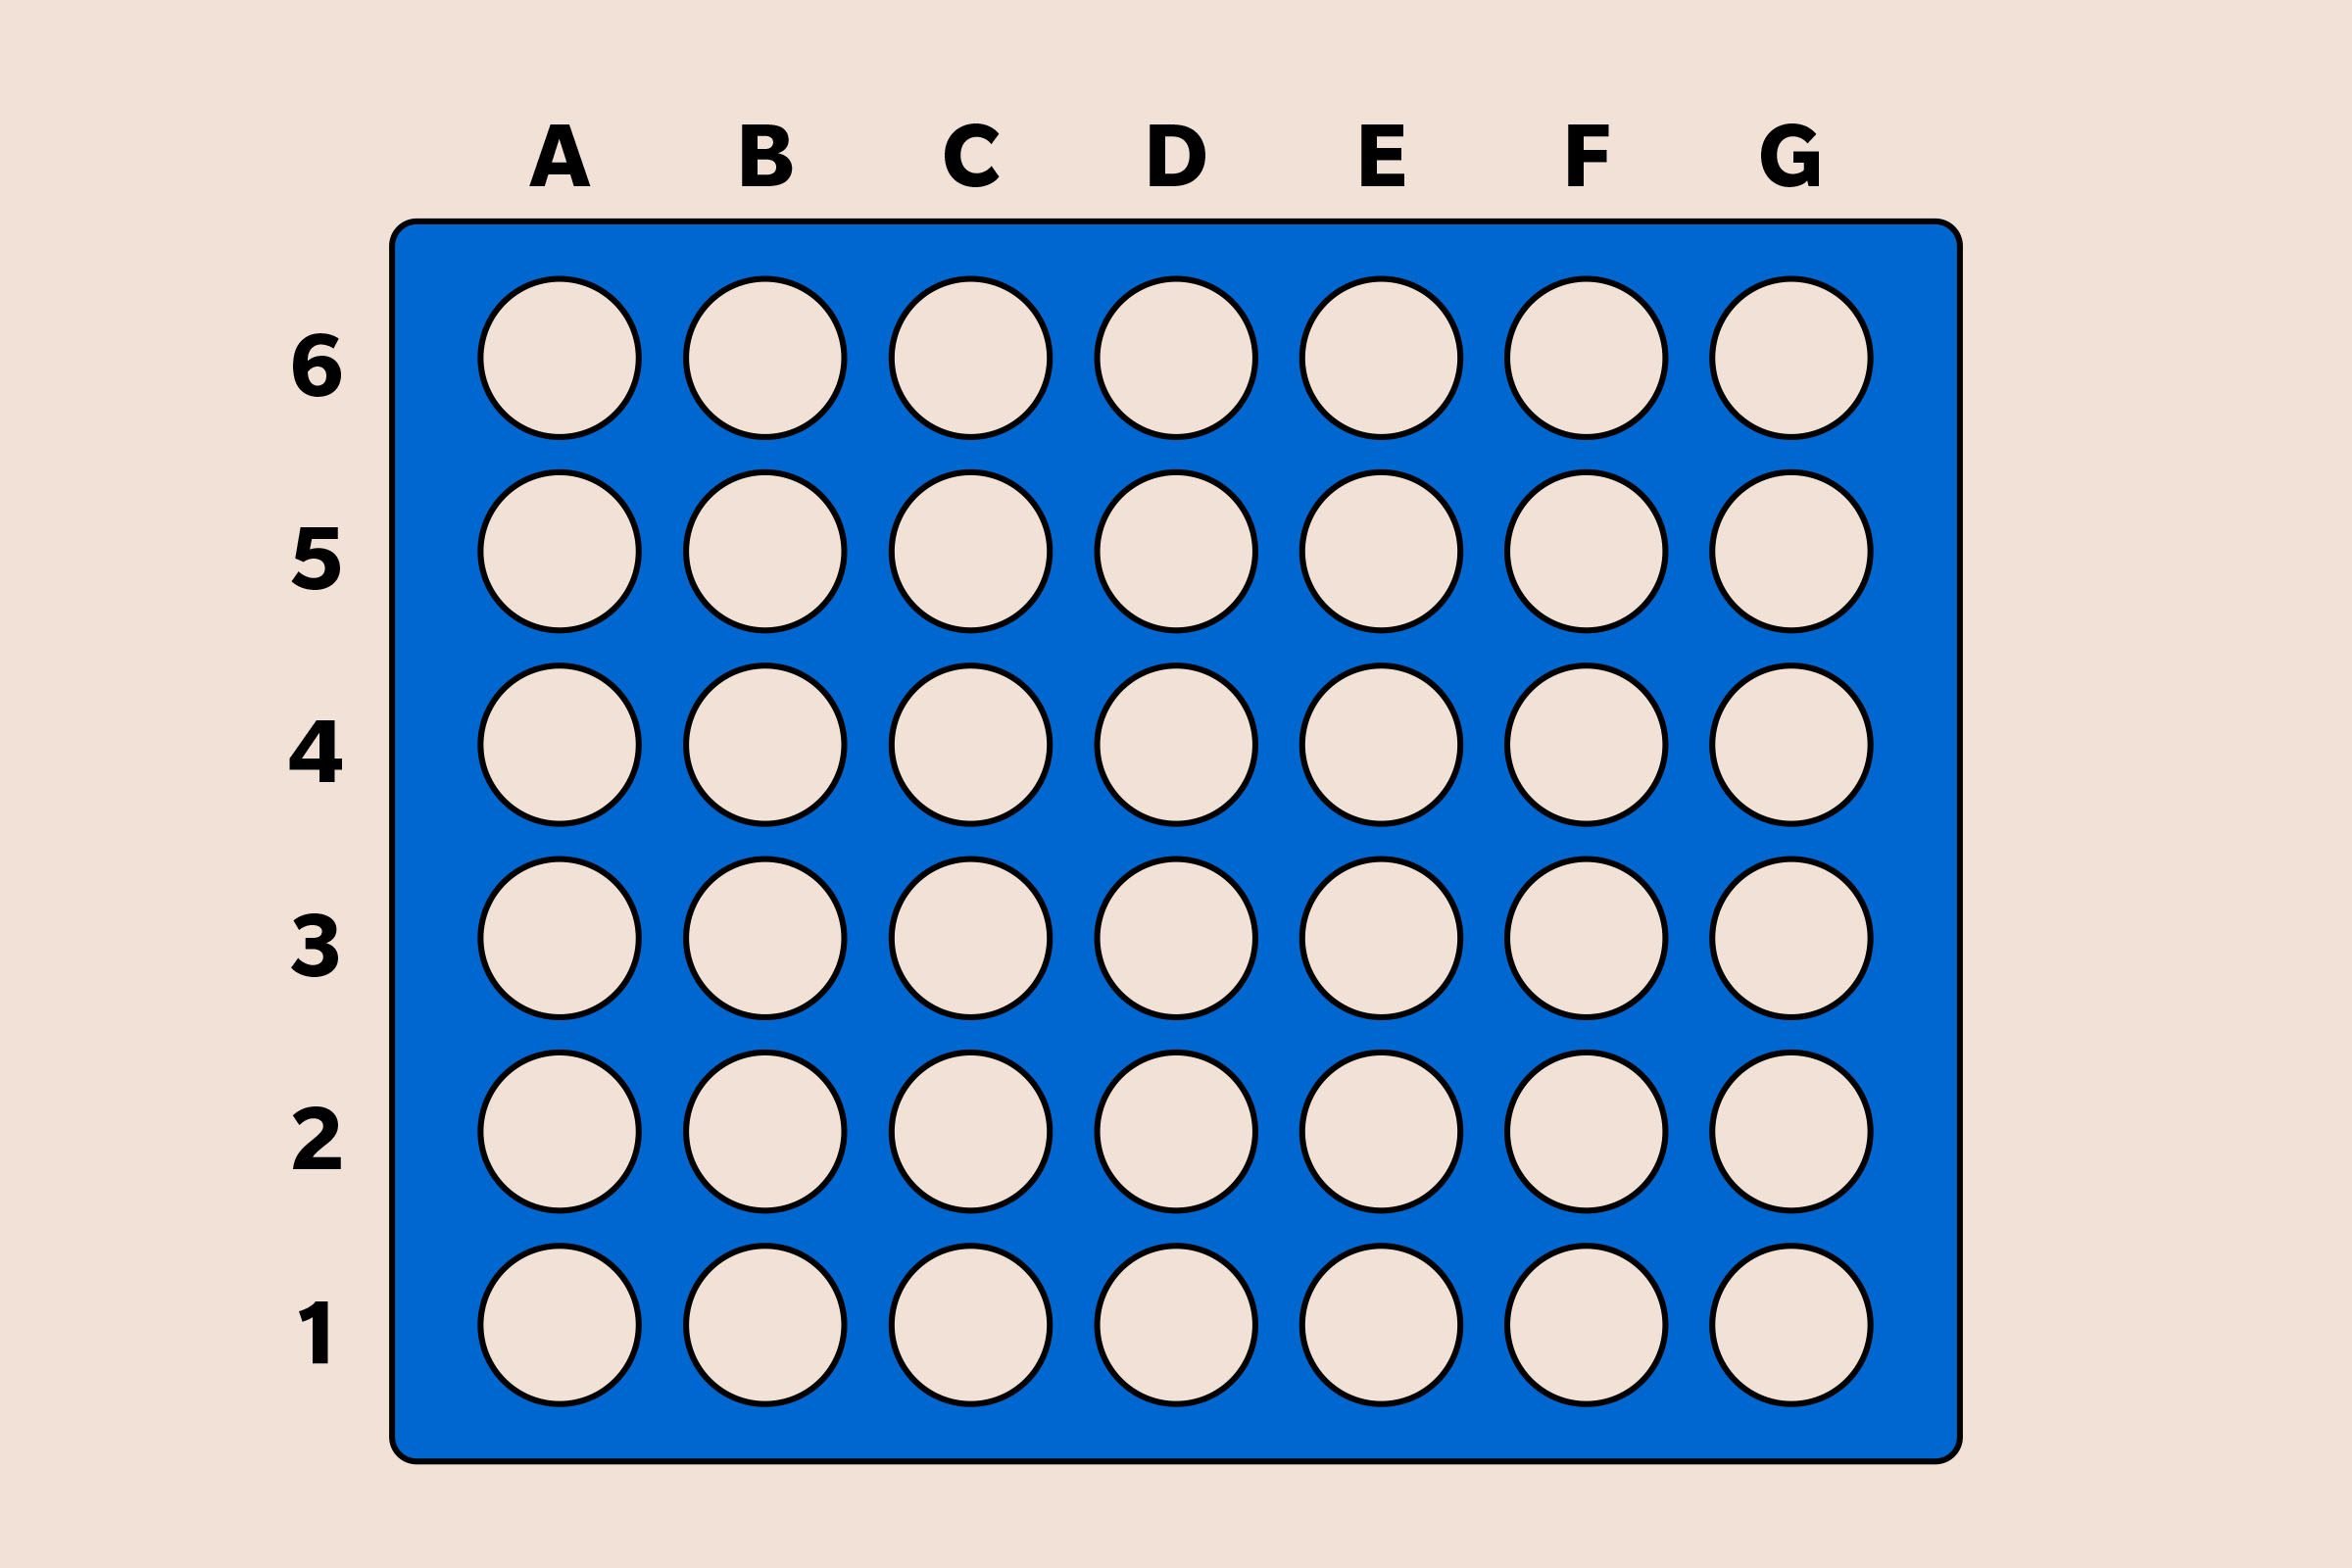 Connect Four game board with columns labeled A-G and rows labeled 1-6